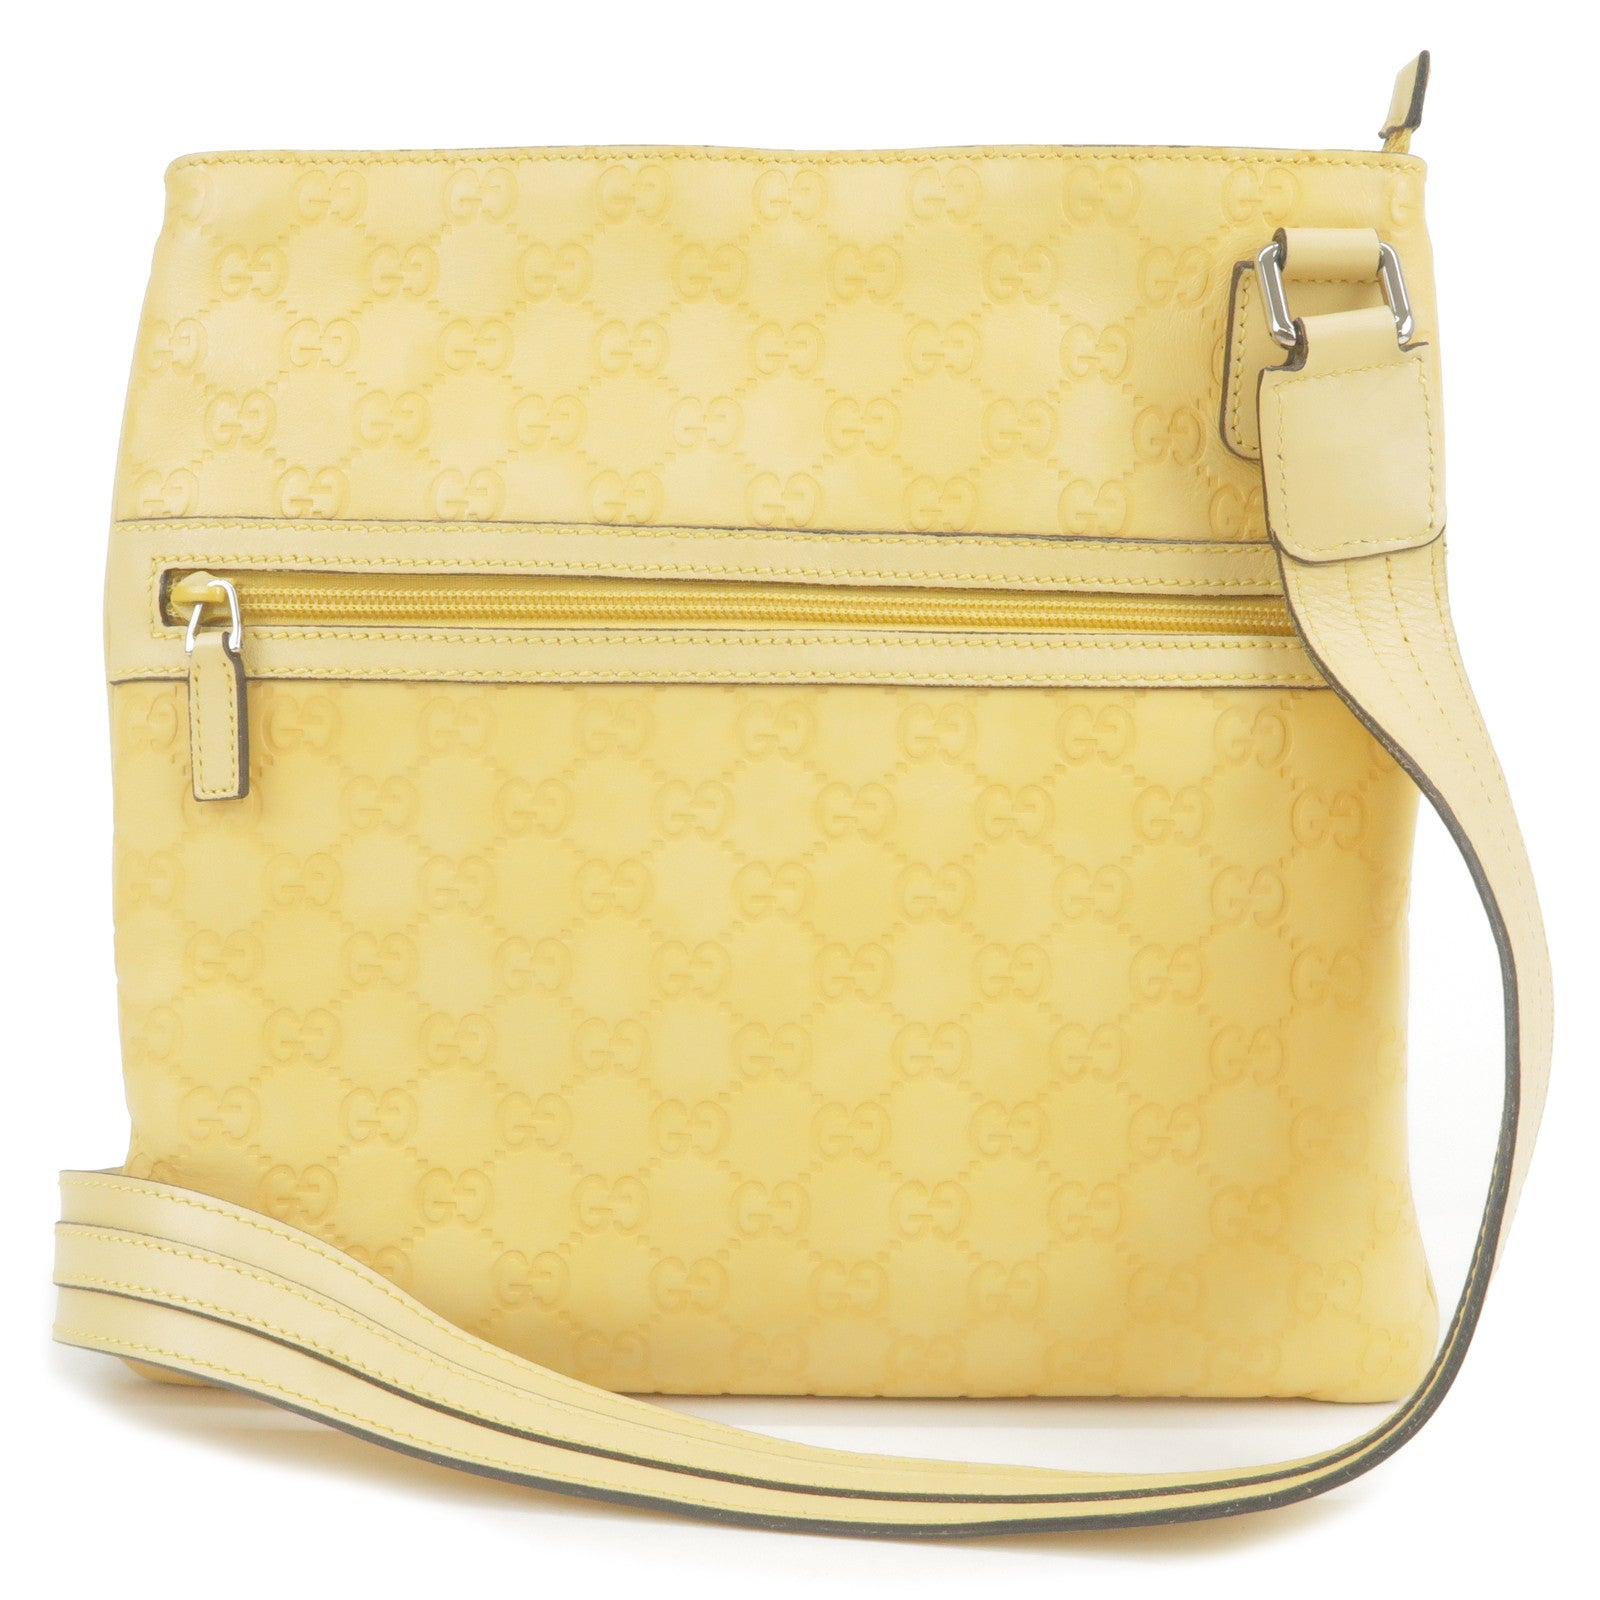 GUCCI-Guccissima-Leather-Shoulder-Bag-Hand-Bag-Yellow-264217